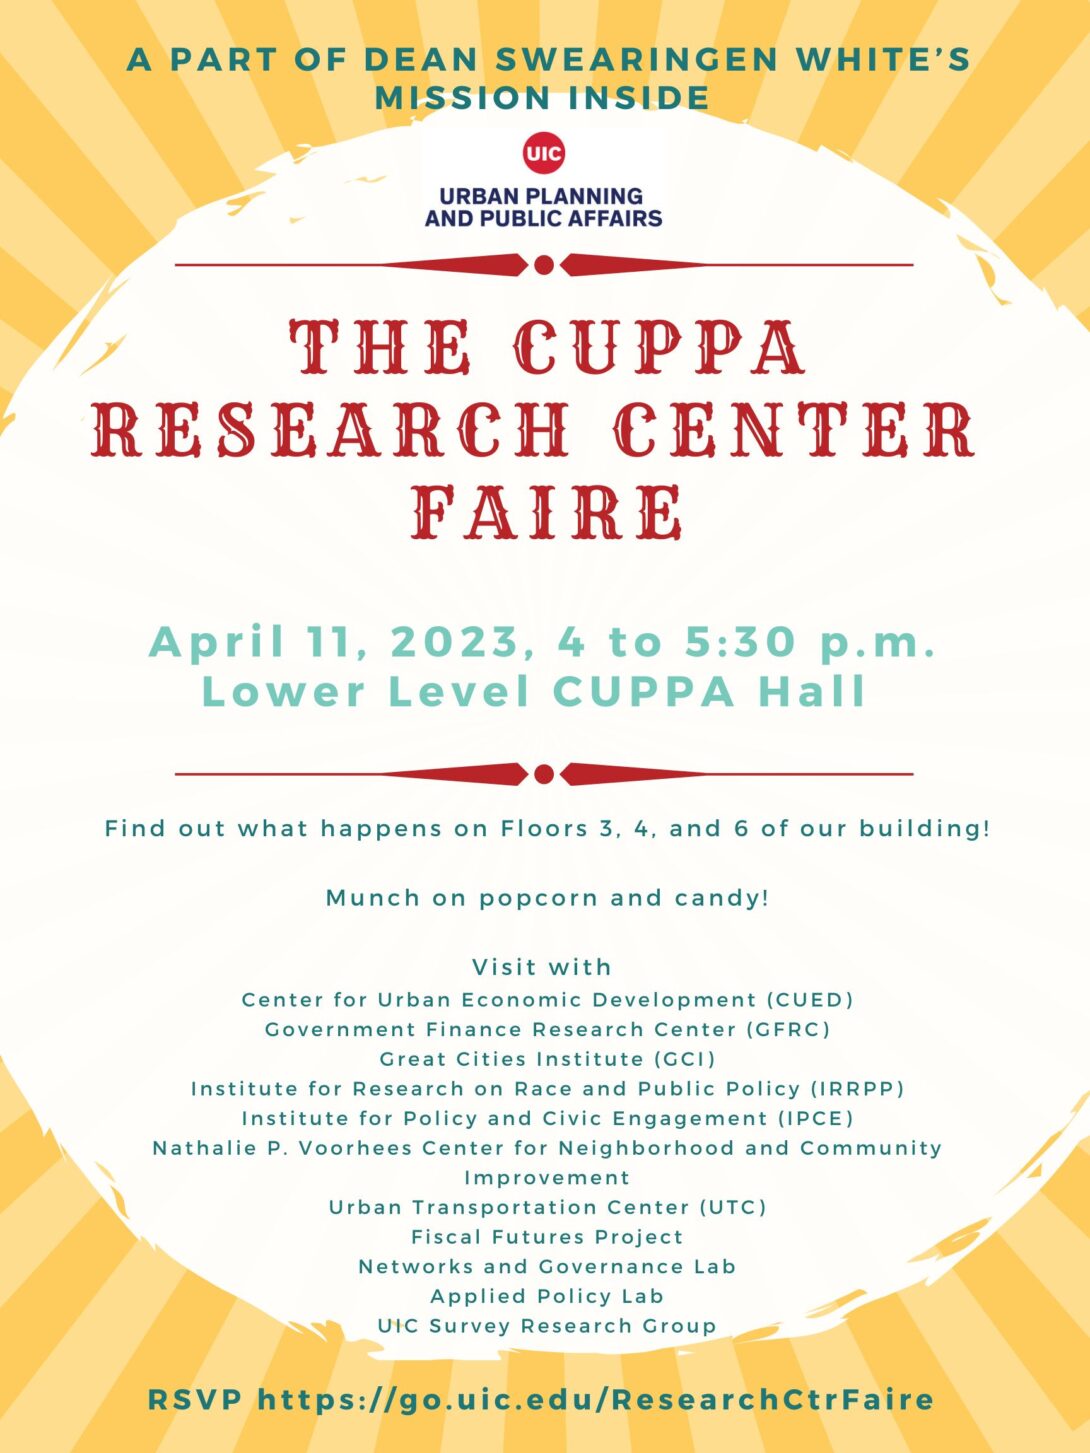 Poster for the CUPPA Research Center Faire with RSVP information https://go.uic.edu/ResearchCtrFaire